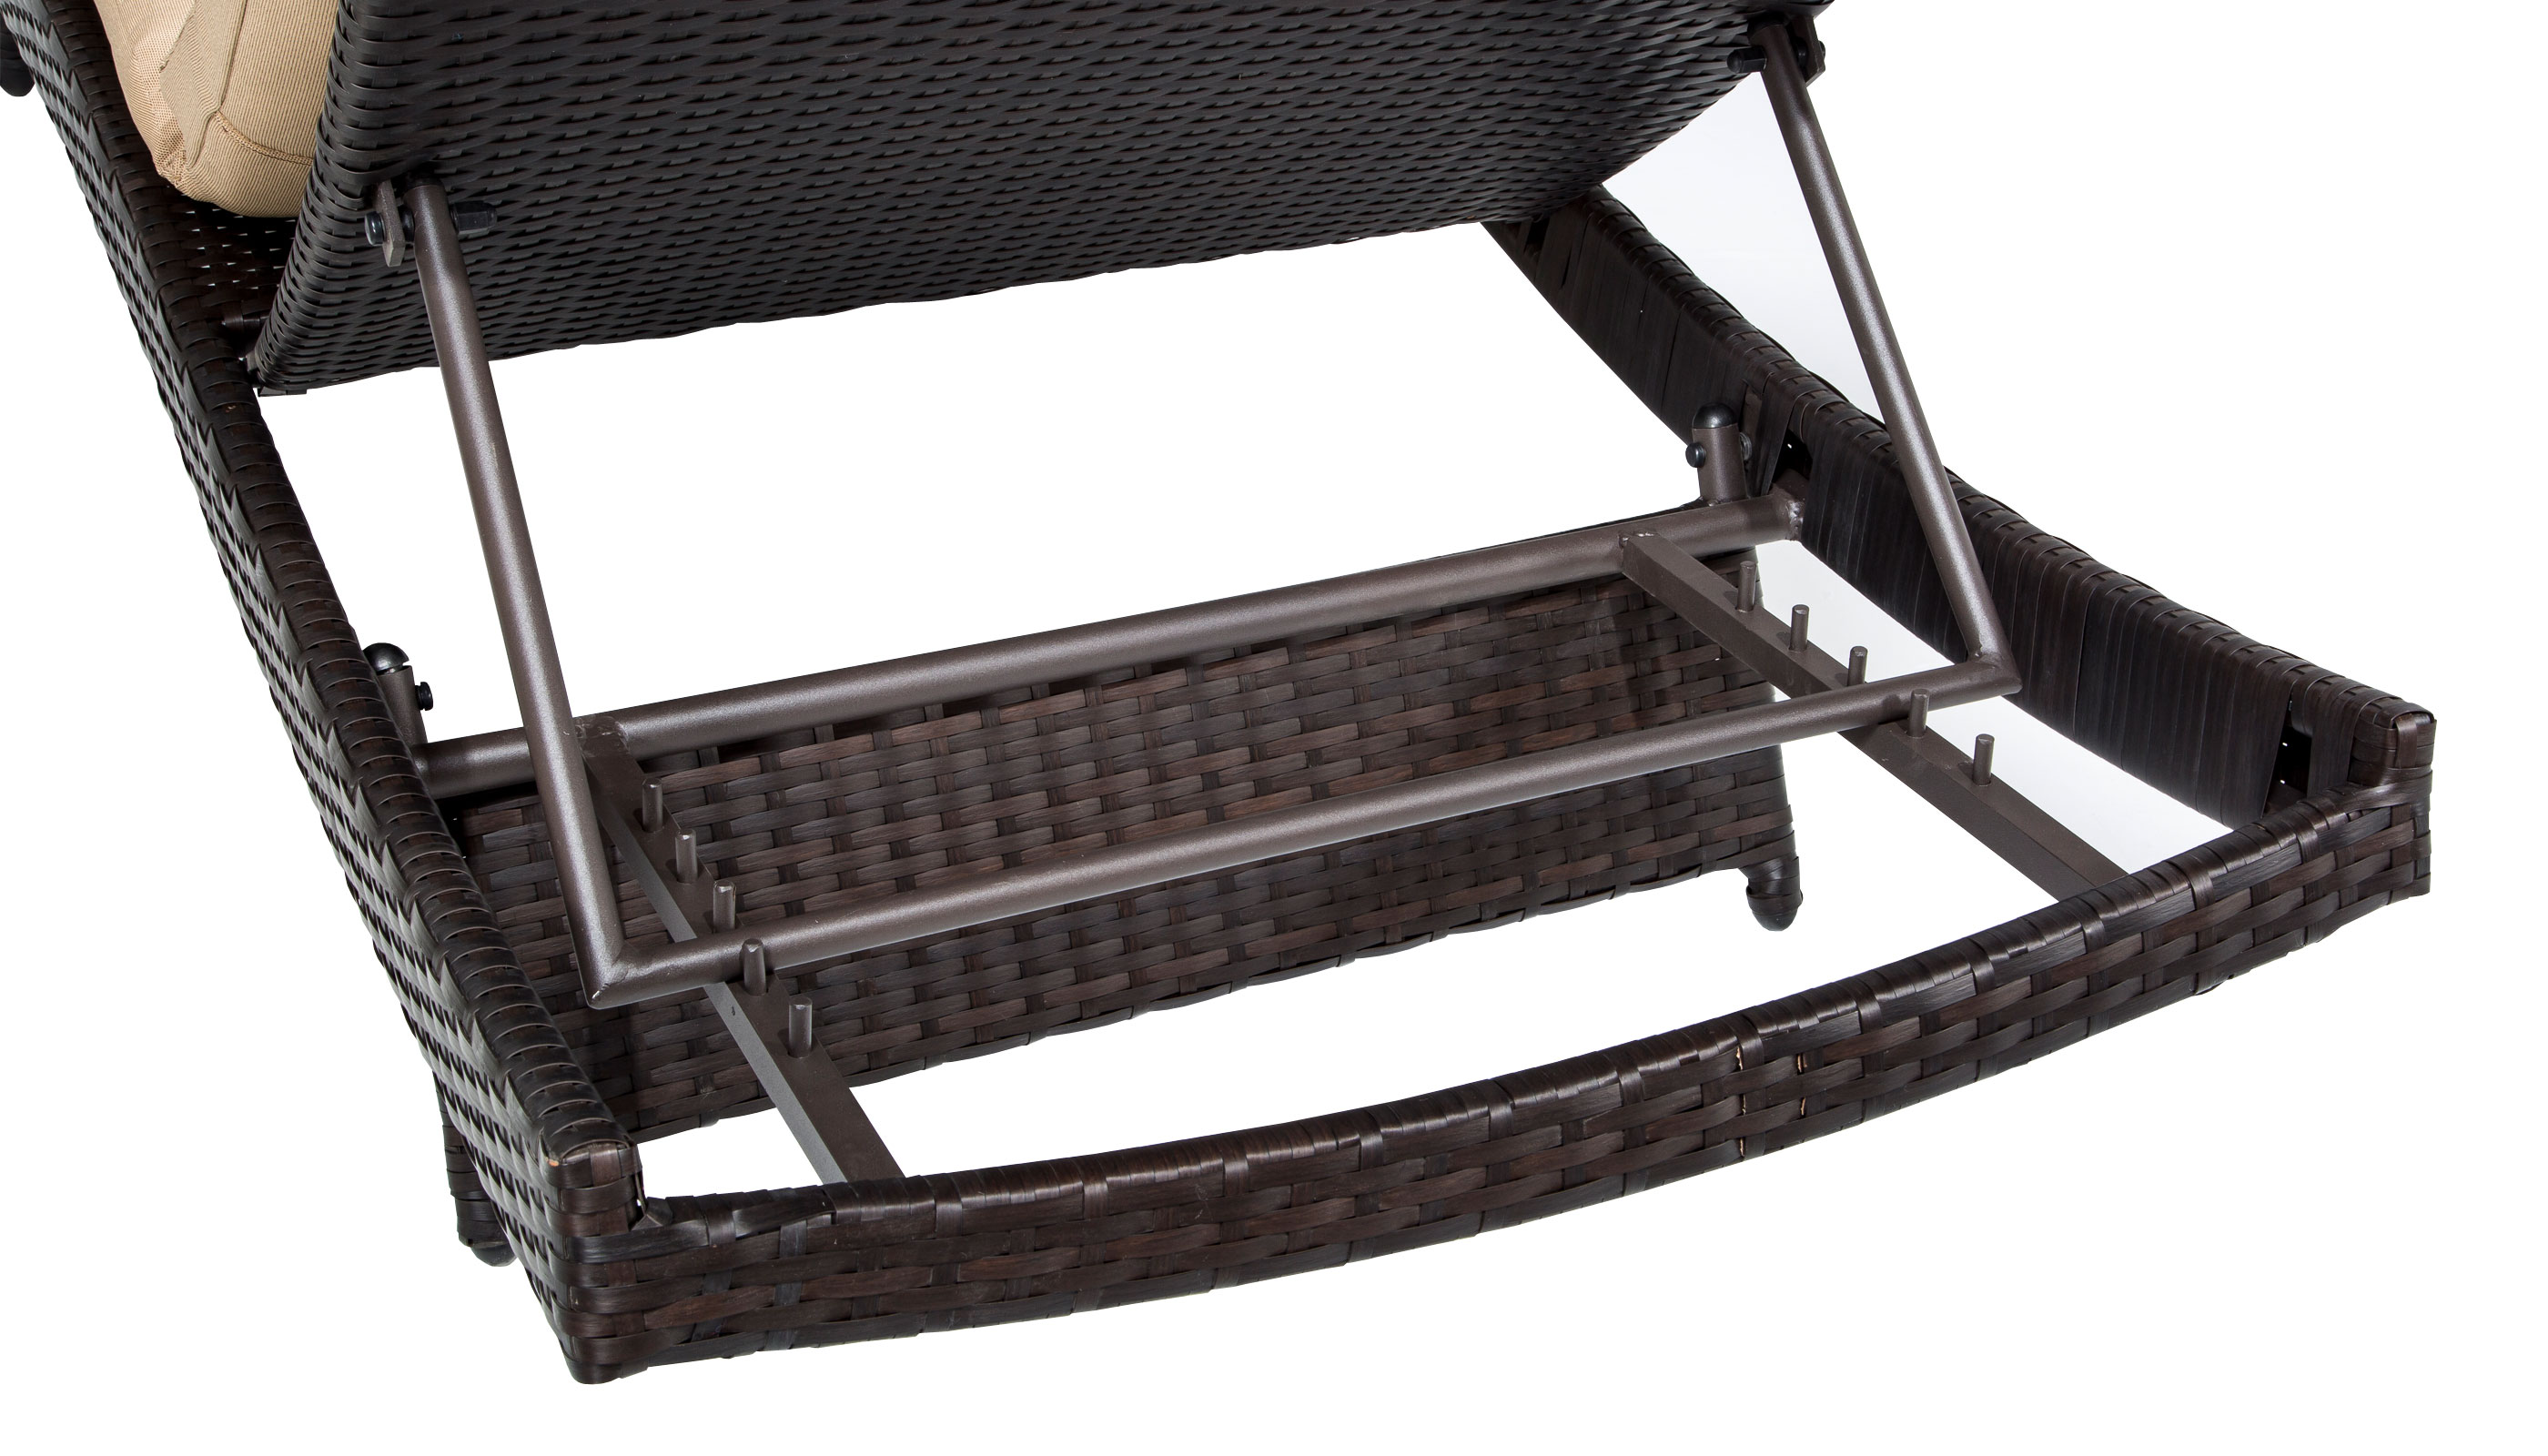 Bali Chaise Set of 2 Outdoor Wicker Patio Furniture With Side Table - TK Classics